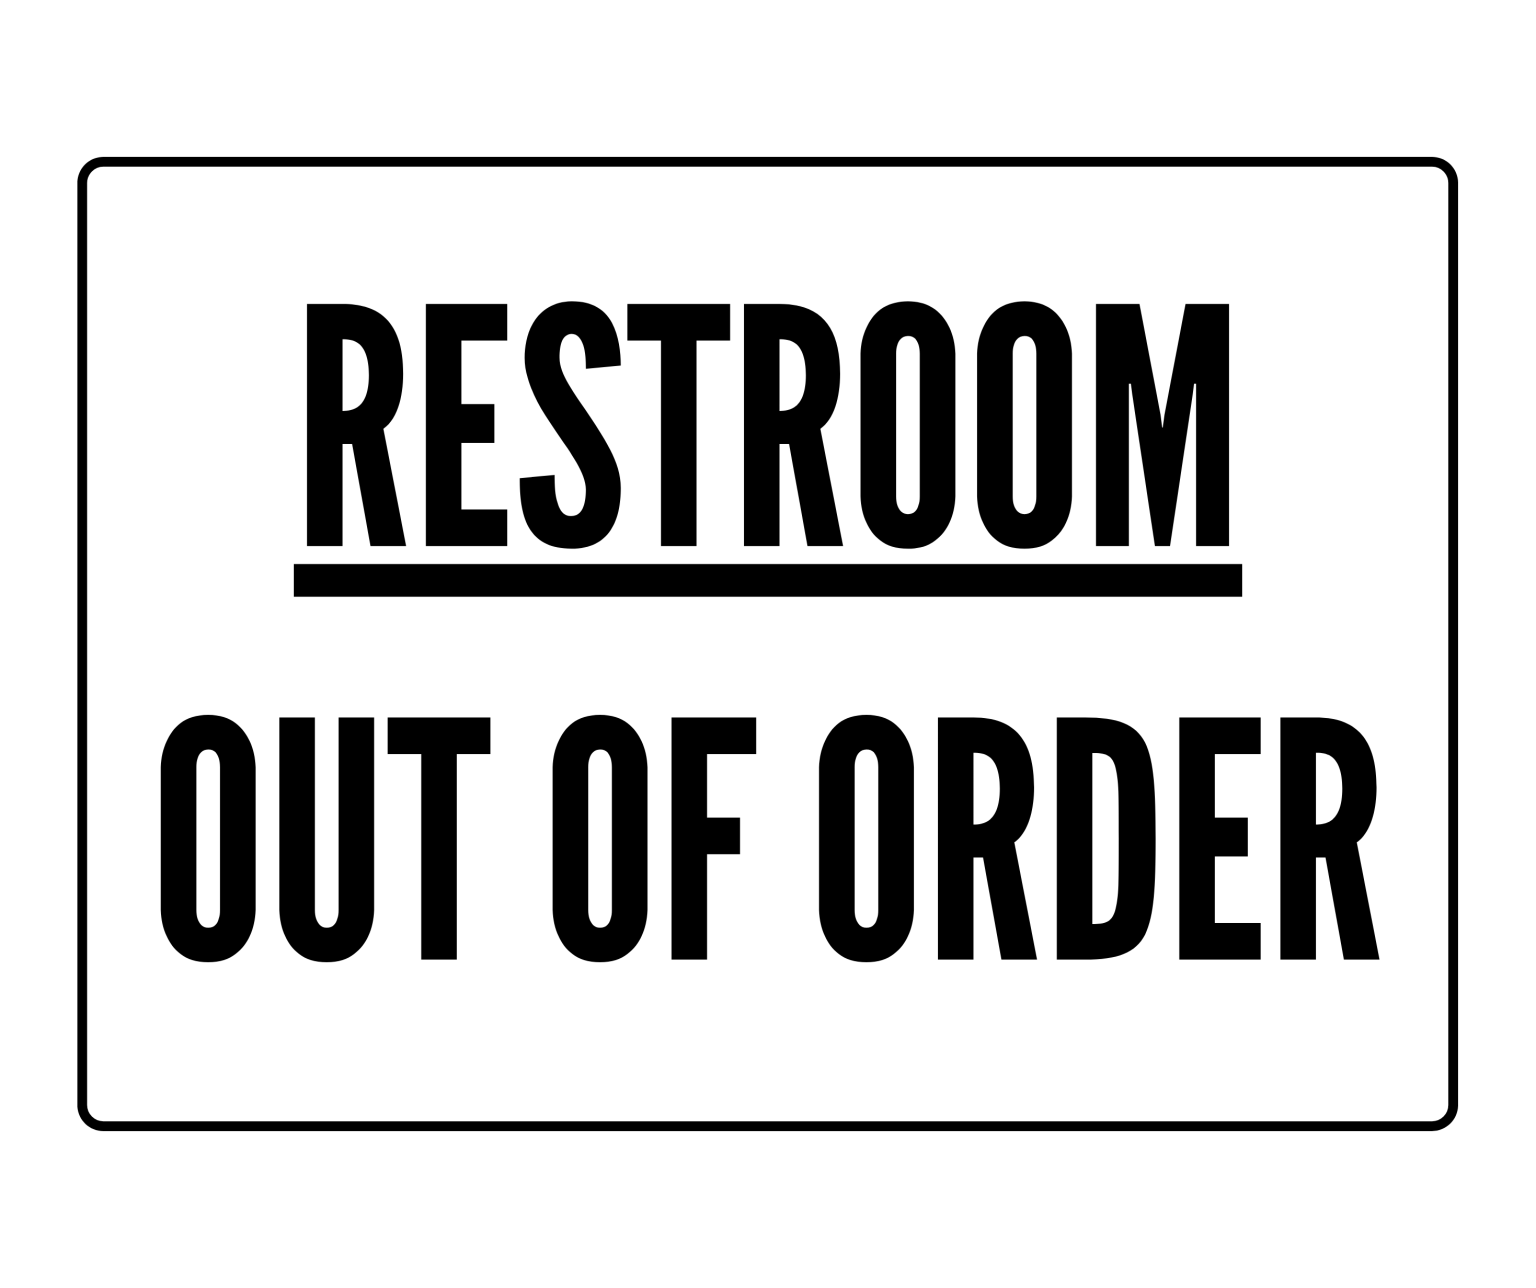 restroom out of order sign printable free